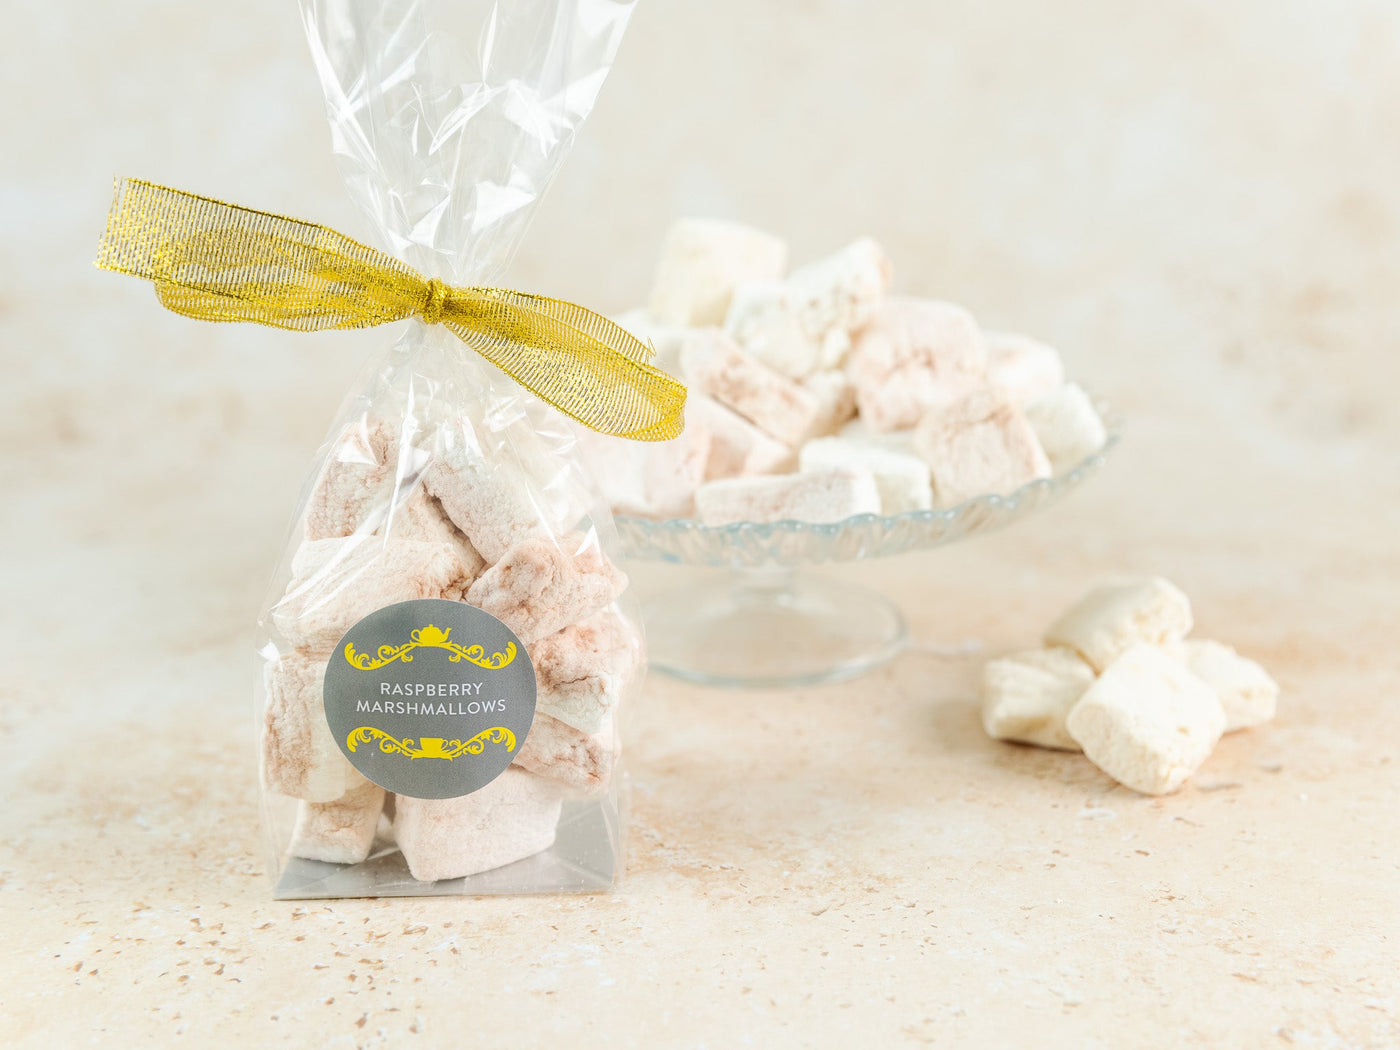 A bag of sweet reason rapberry marshmallows tied with a gold ribbon, with a plate of marshmallows in the background